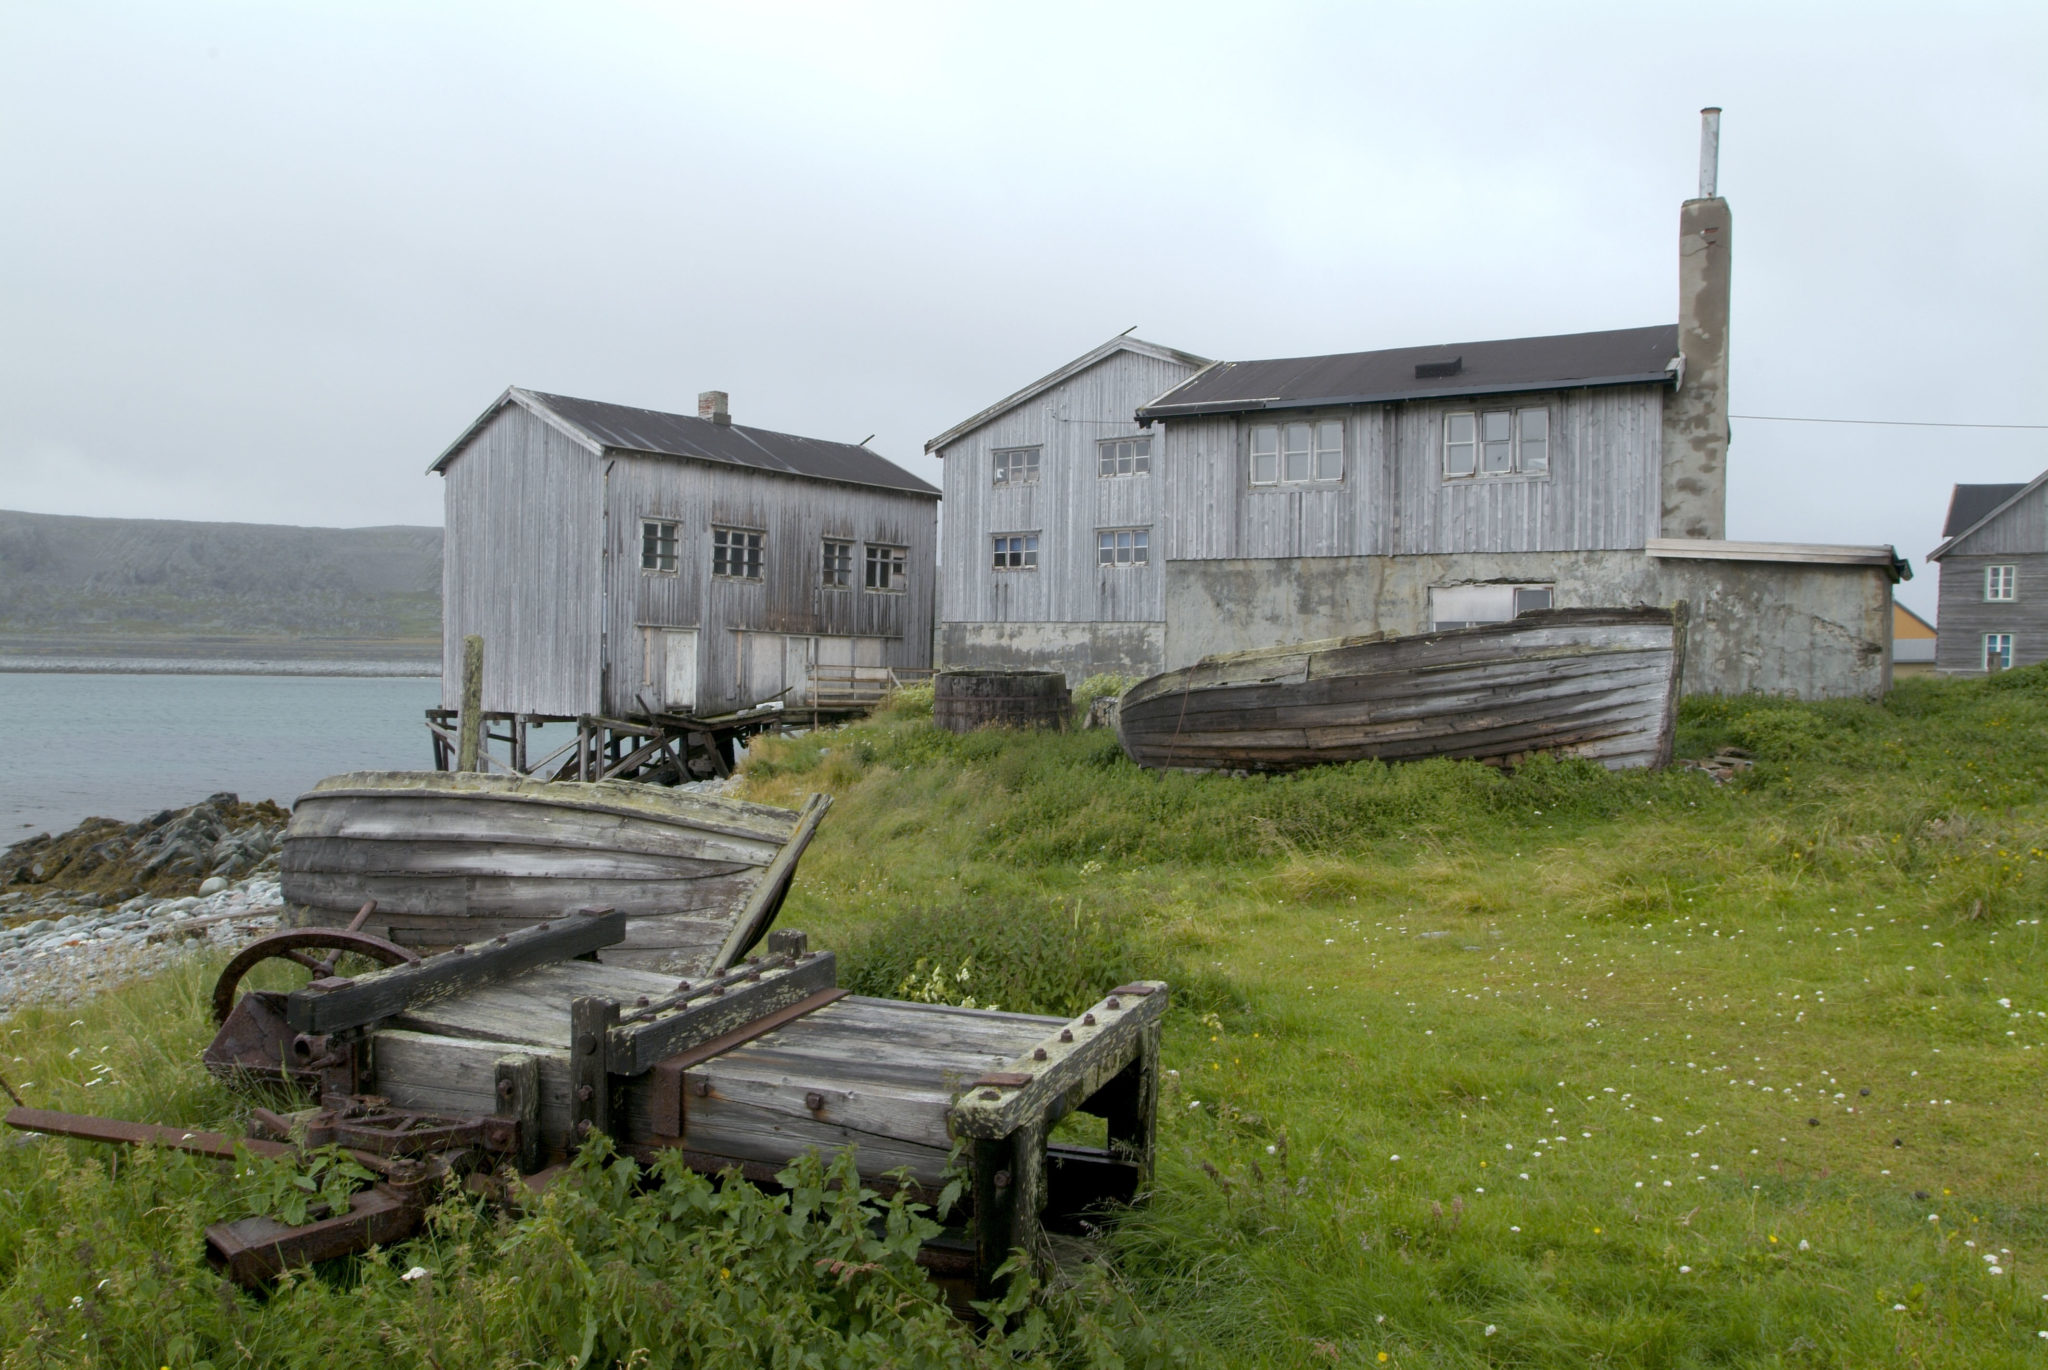 Hamningberg is a place where you can experience the architecture of 'old Finnmark', as buildings here escaped destruction at the end of World War 2